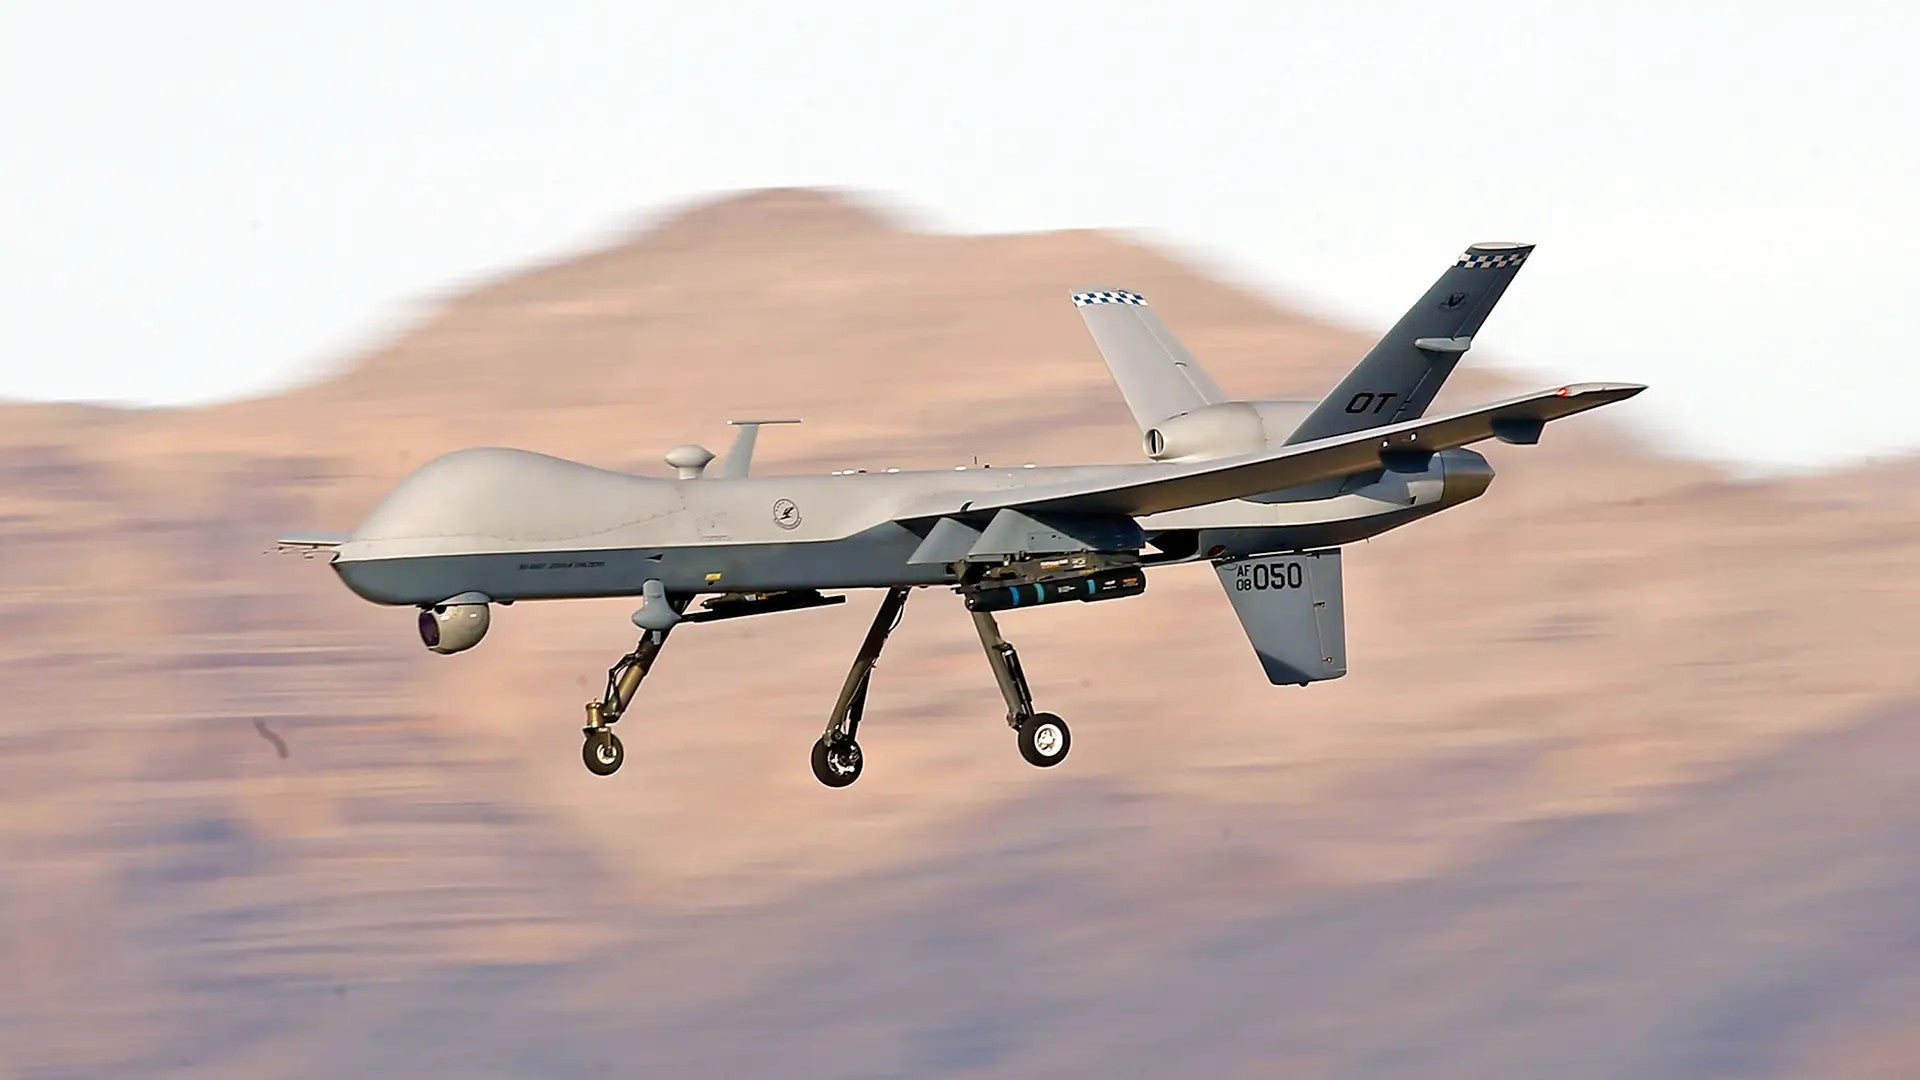 A stock picture of a US Air Force MQ-9 Reaper drone. USAF